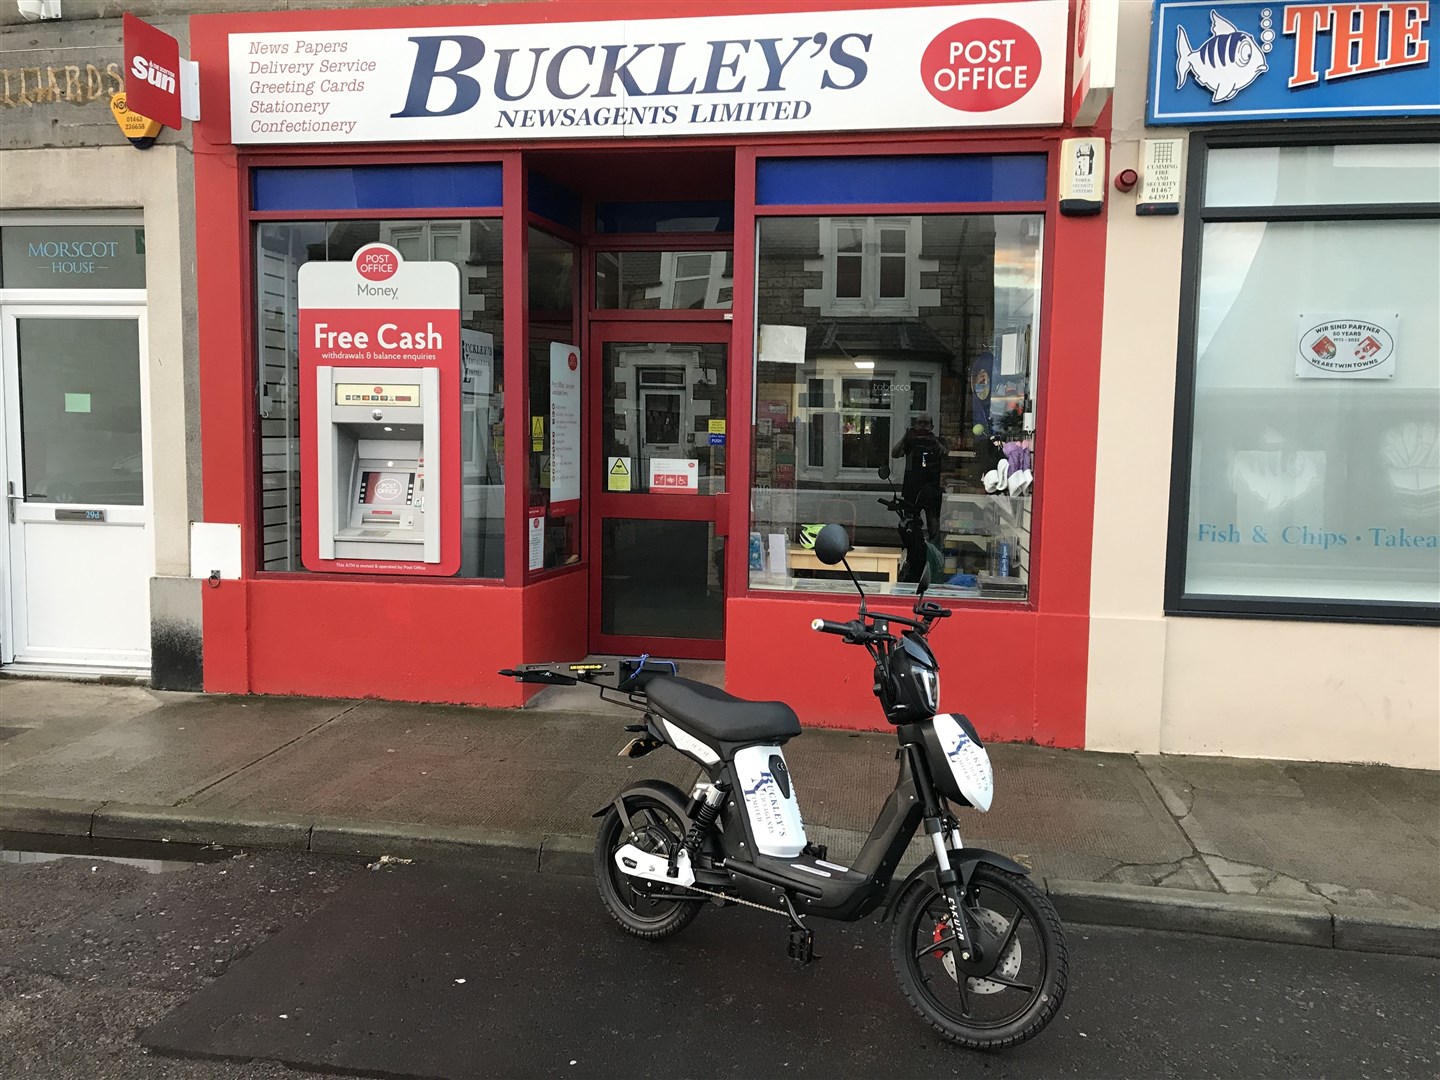 Buckley's Newsagents has a new electric scooter, which owner Tony Rook is using to do his rounds.